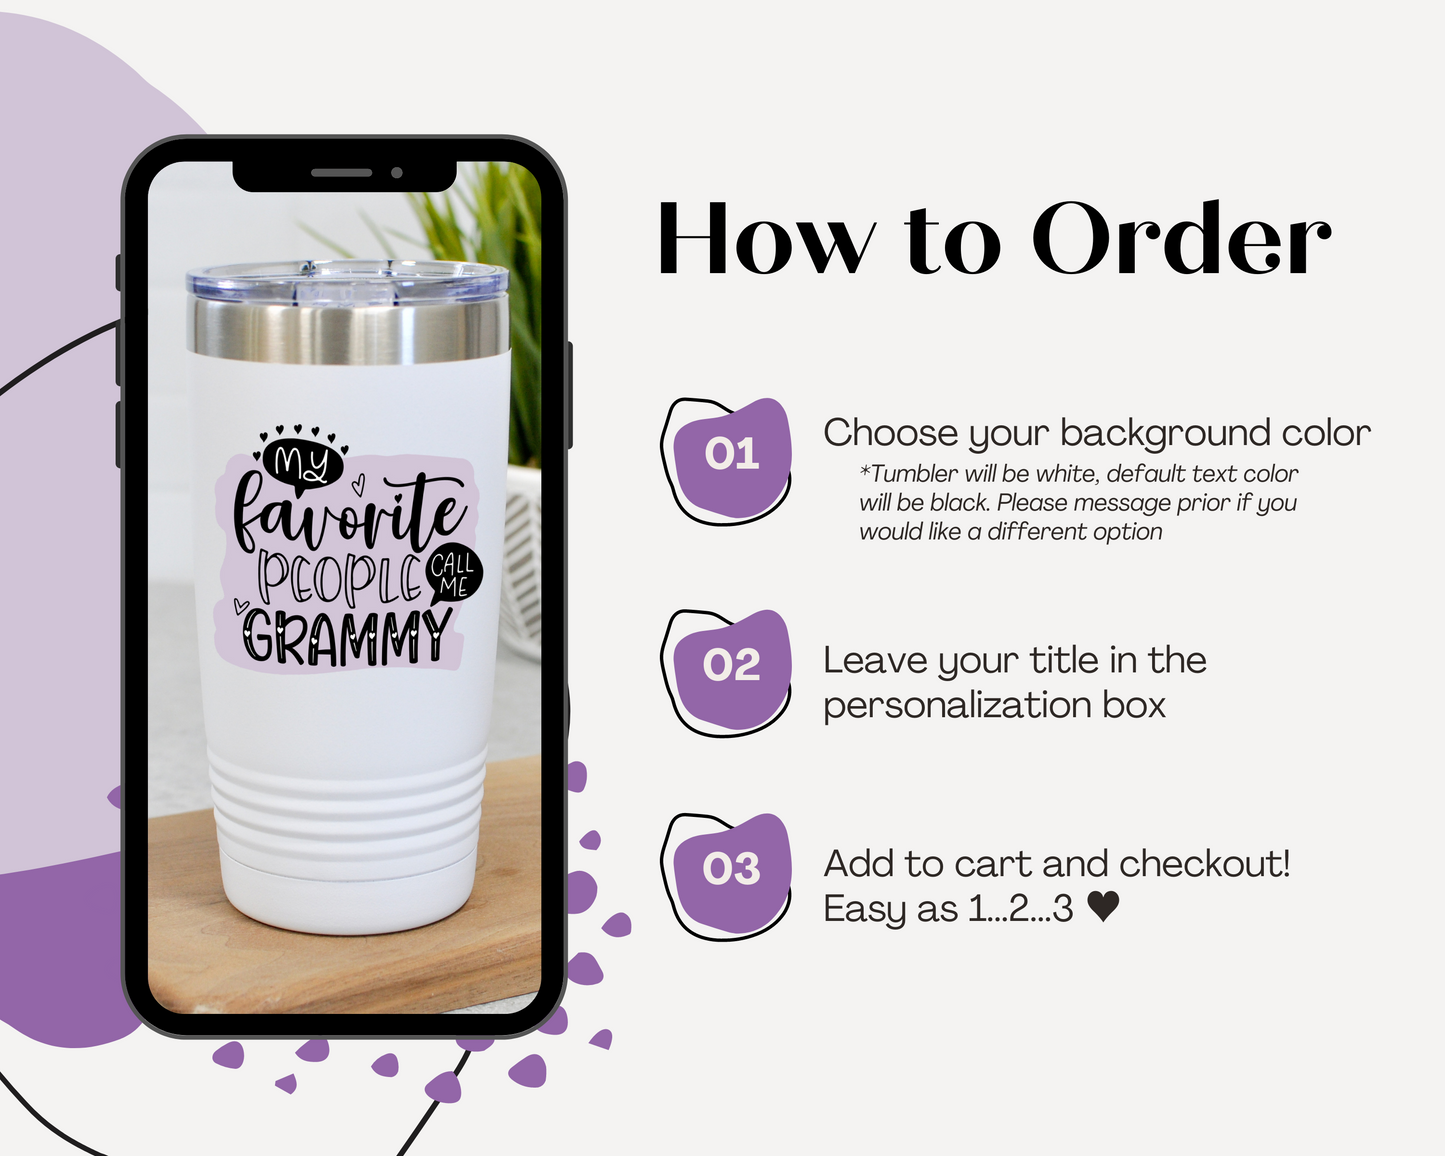 how to order: choose your background color, leave title in the personalization box, add to cart and check out